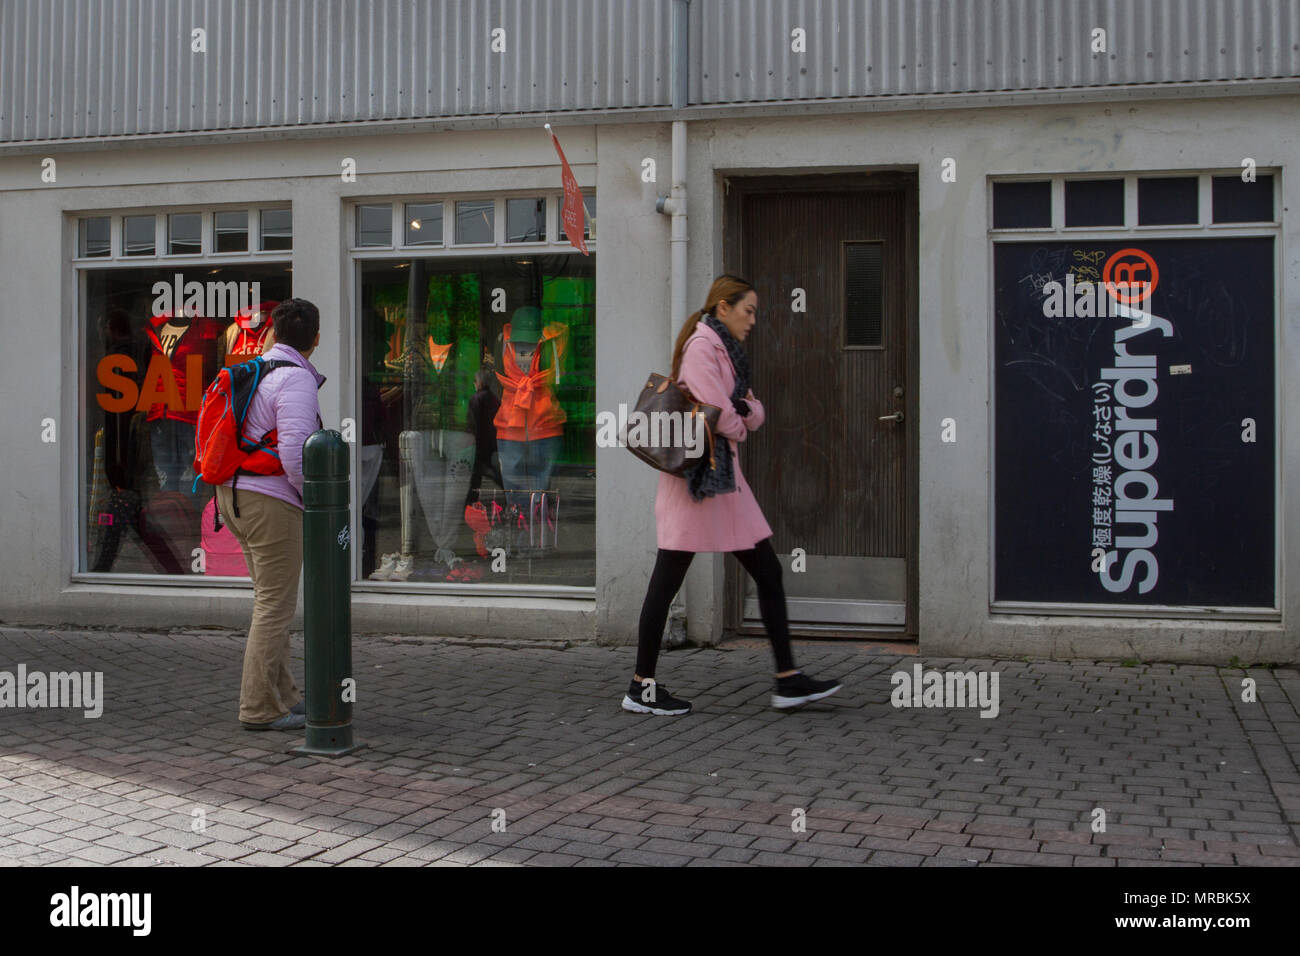 SuperDry business, clothes retailing, winter parka coats clothing, fabric,  fashion logo, shape & branding Shops, Shoppers and shopping in Reykjavik,  Iceland Stock Photo - Alamy